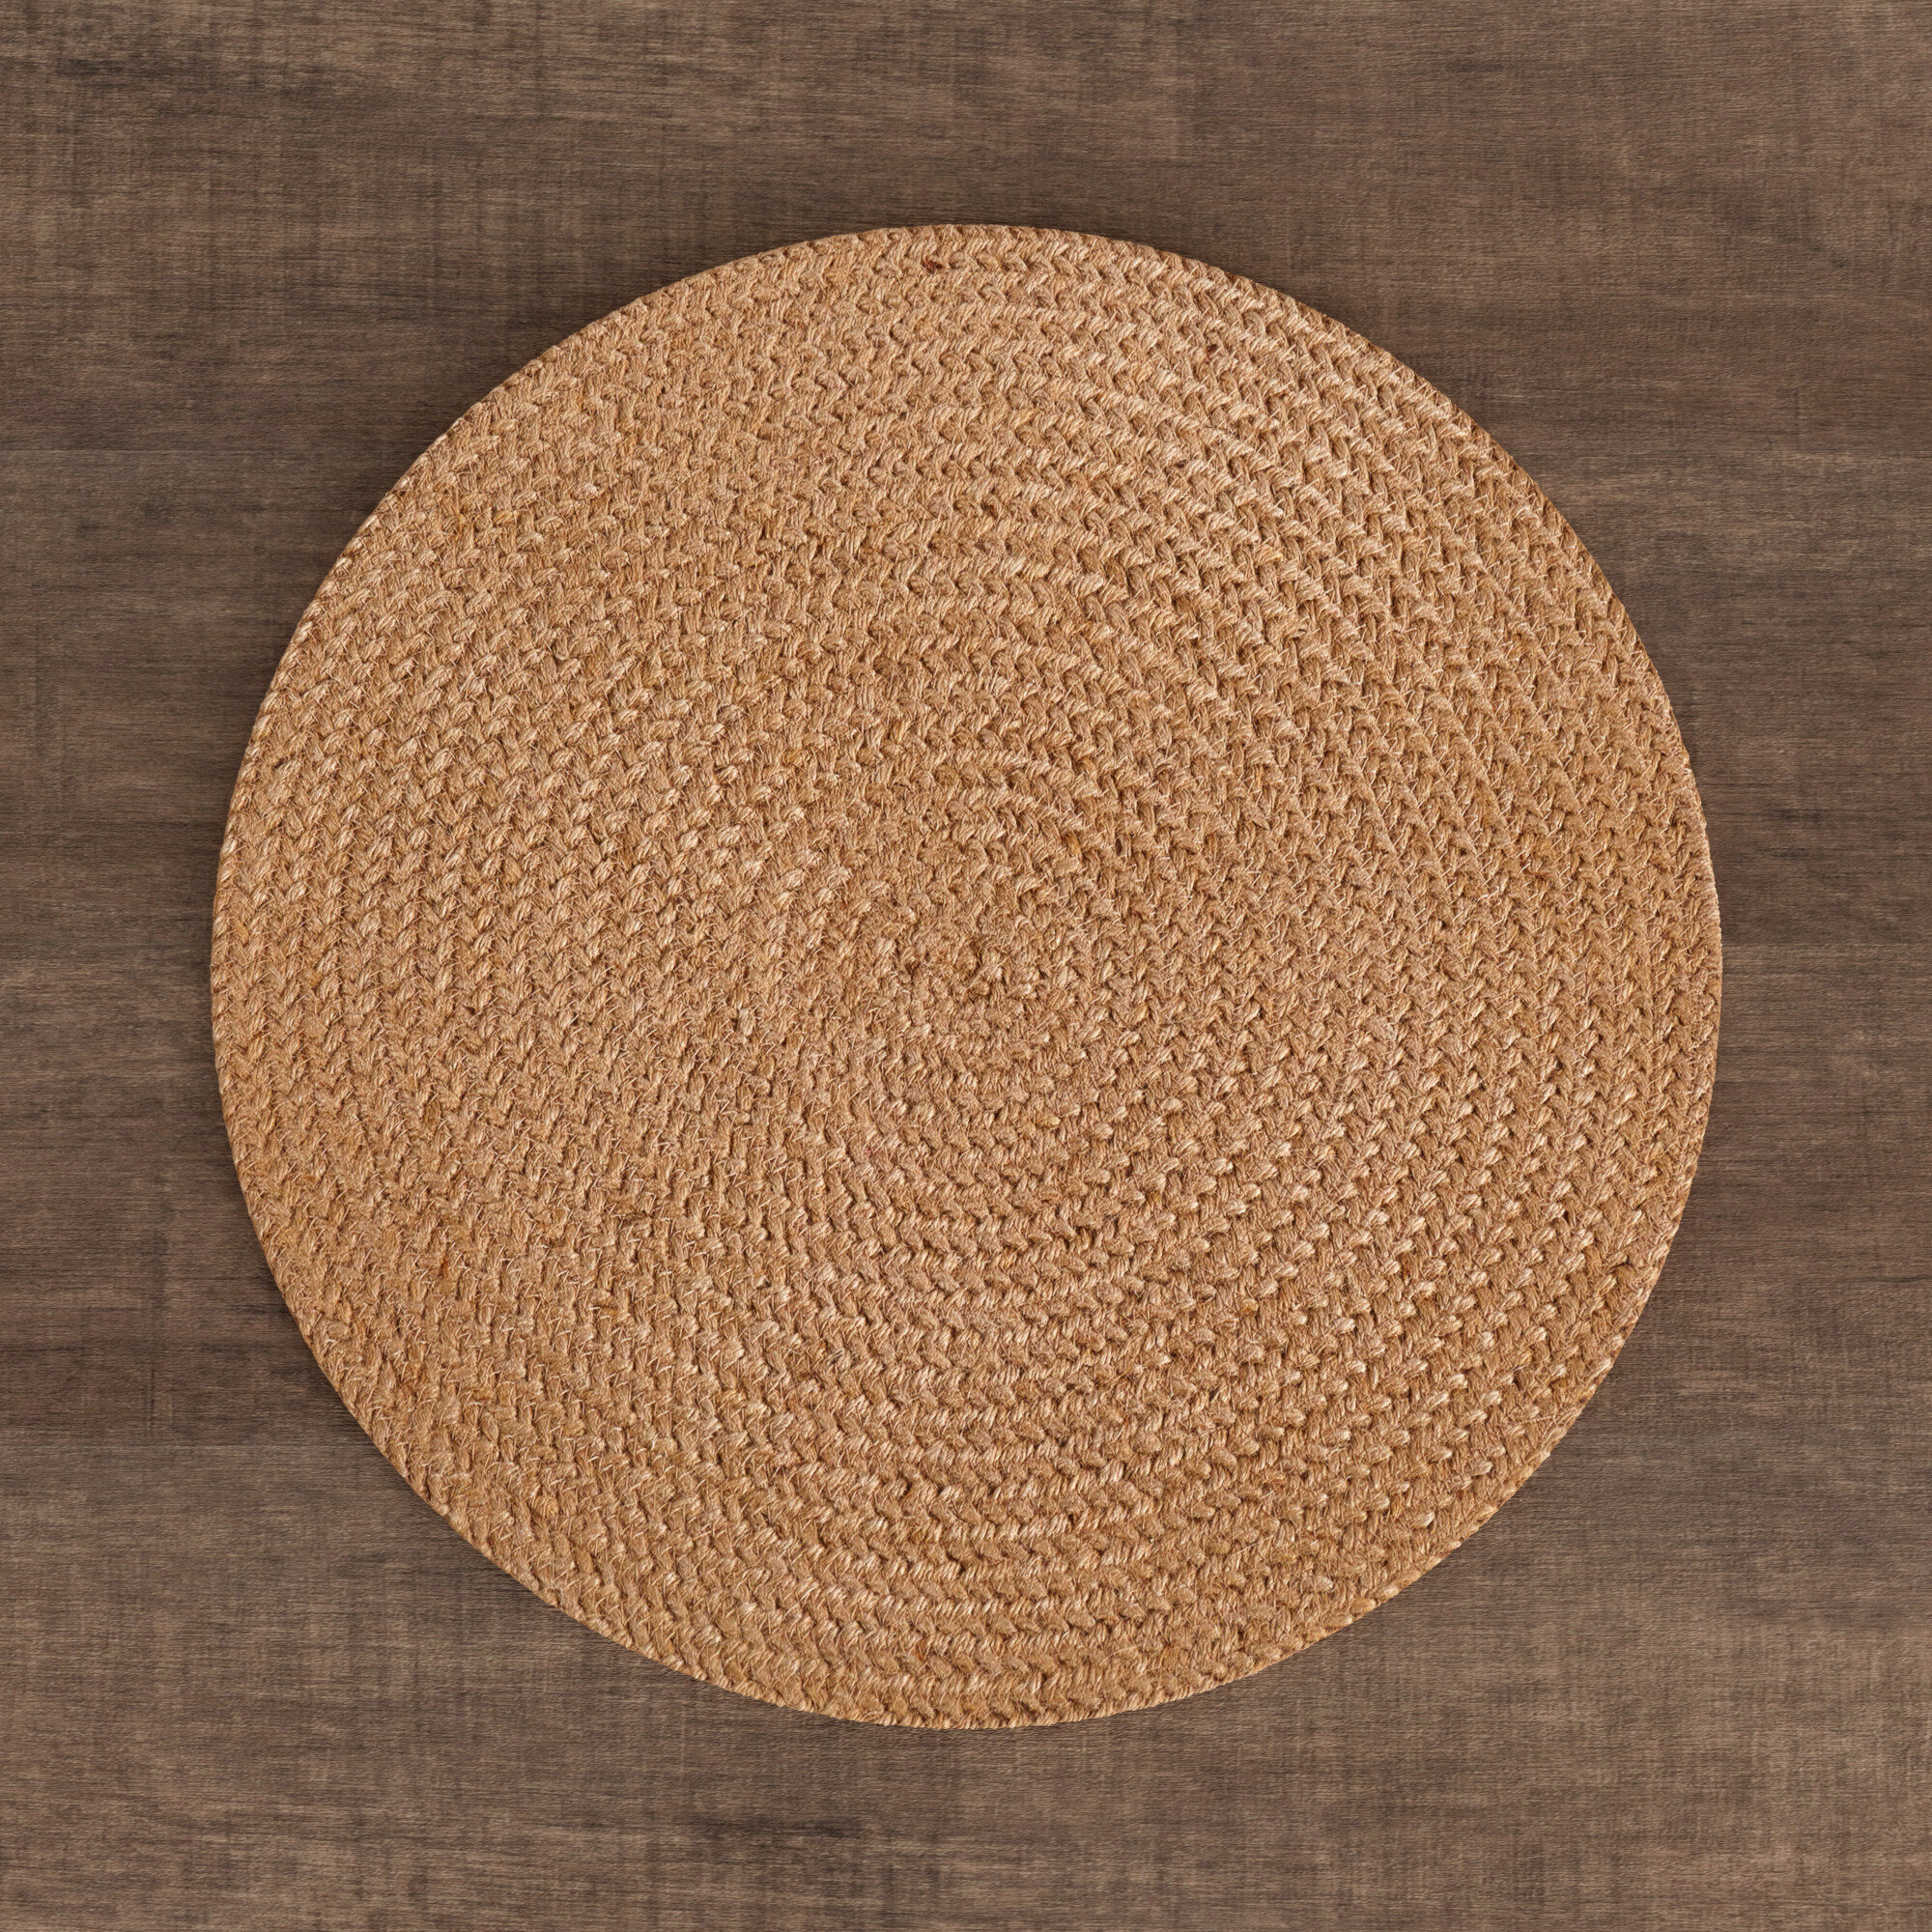 12x16inch JYMBK Rattan Woven Placemats,oval Round Table Mats,non Slip Heat Resistant Place Matv,natural Multipurpose Placemat,trivets For Hot Dishes Oval 30x40cm 